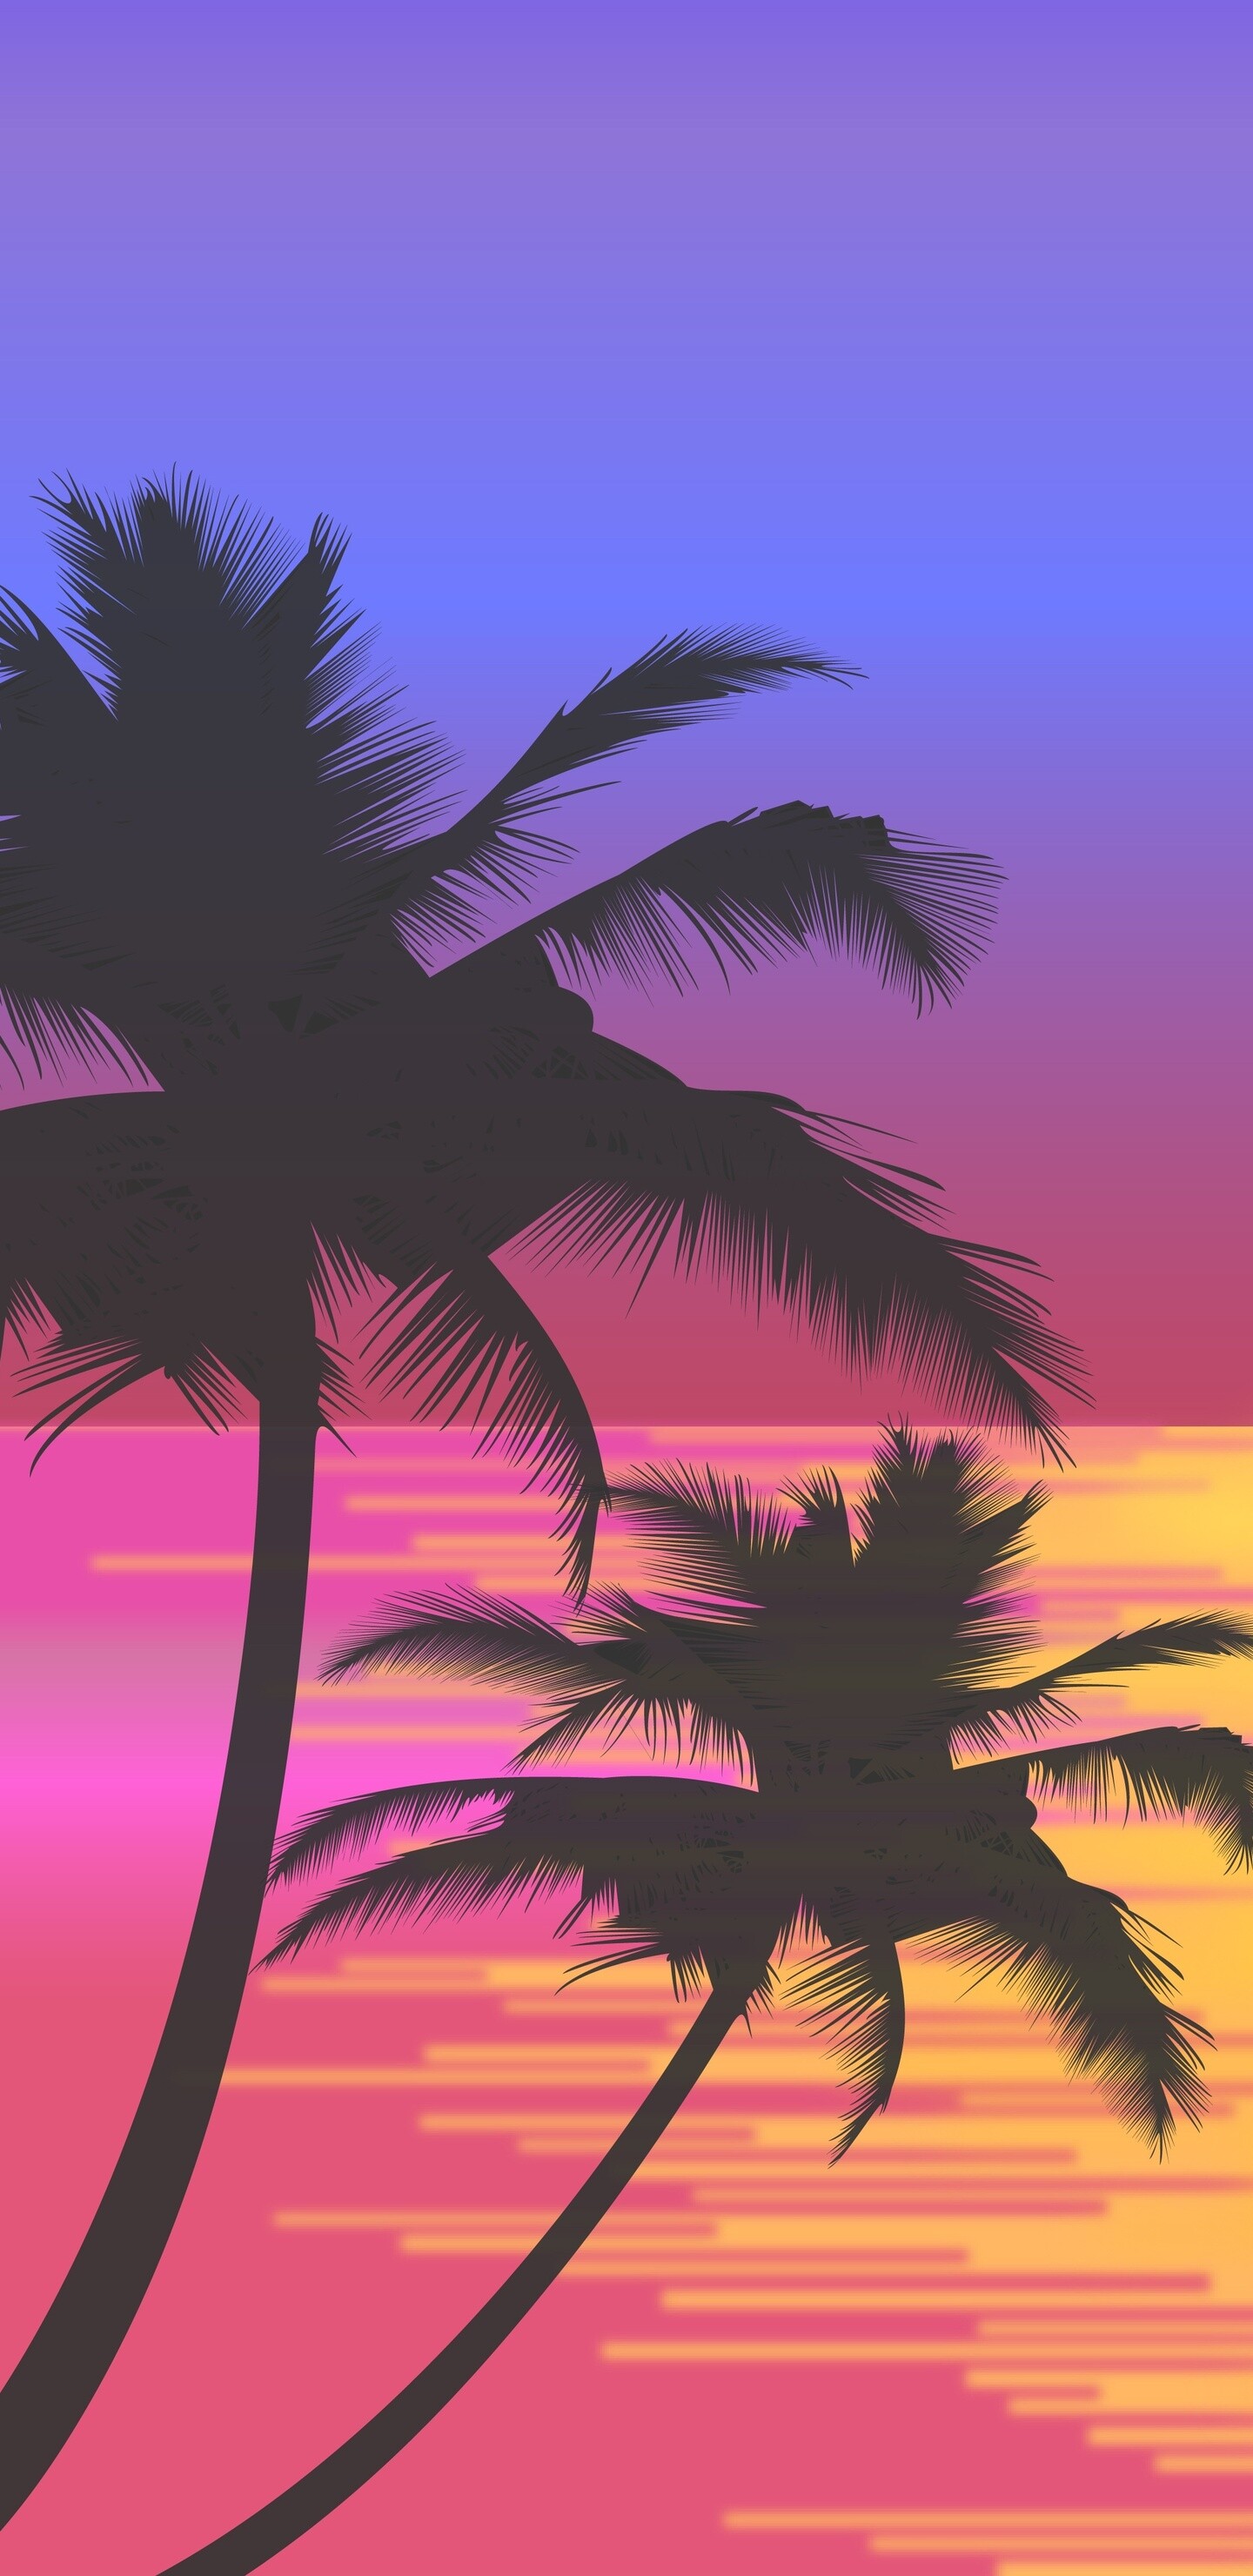 Palm Tree: Trees restricted to tropical and subtropical climates, Minimalistic. 1440x2960 HD Wallpaper.